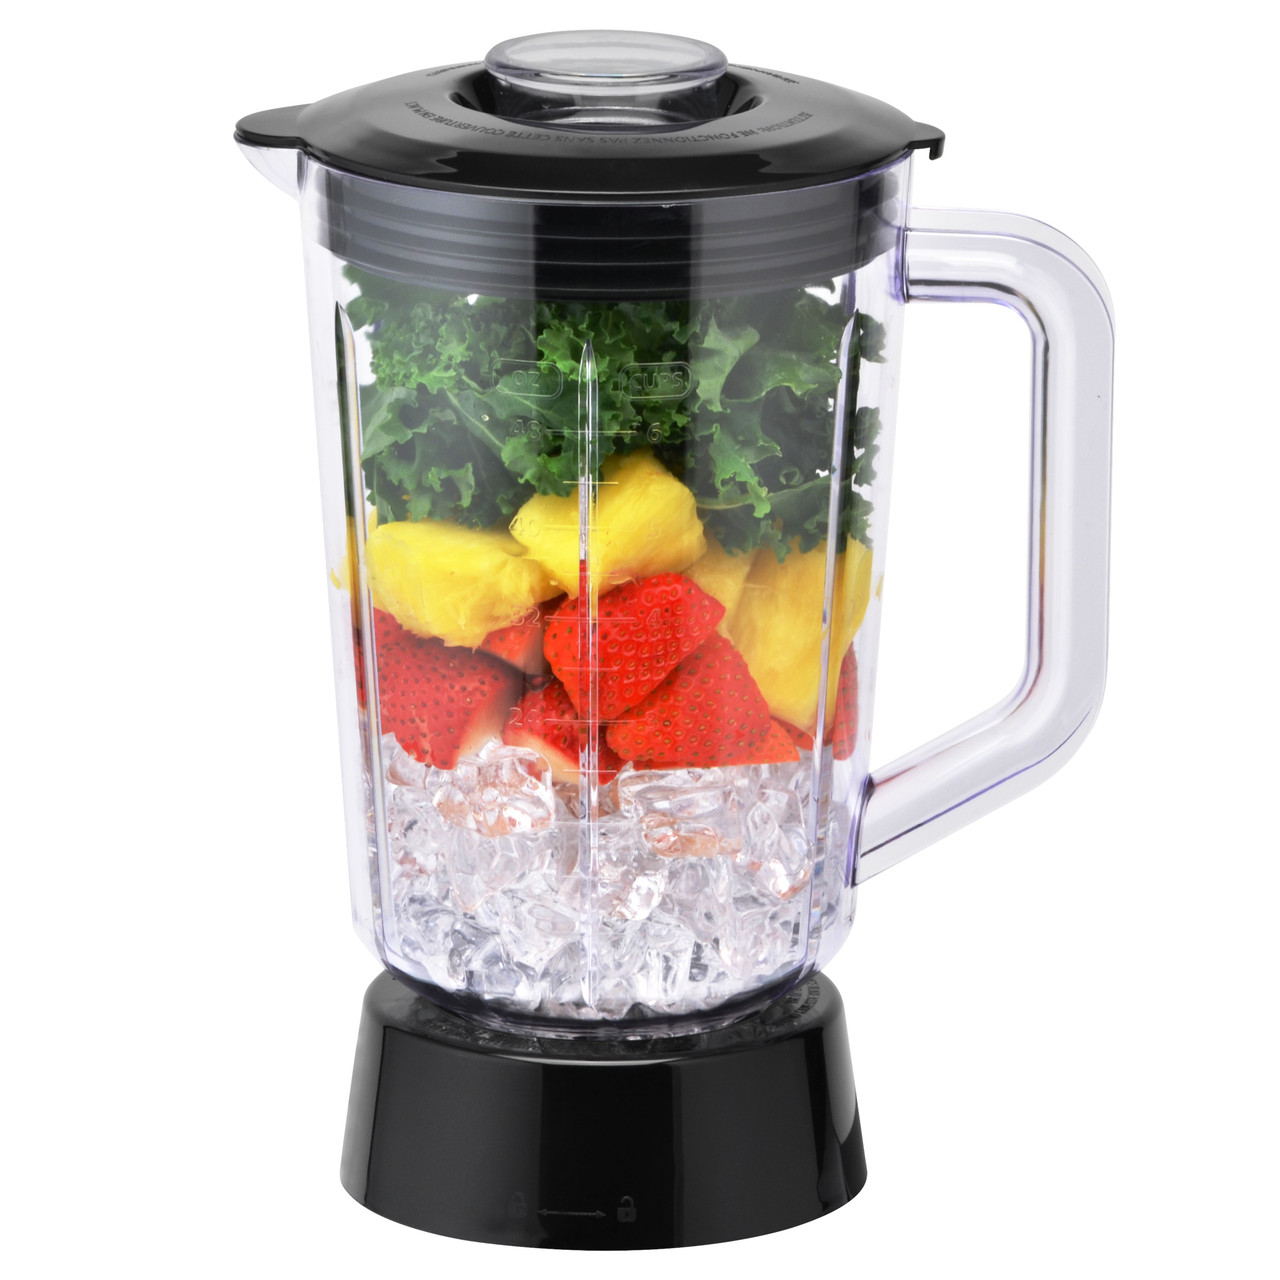 Toastmaster Mini Personal Blender 15 oz Smoothie Maker. New in Box